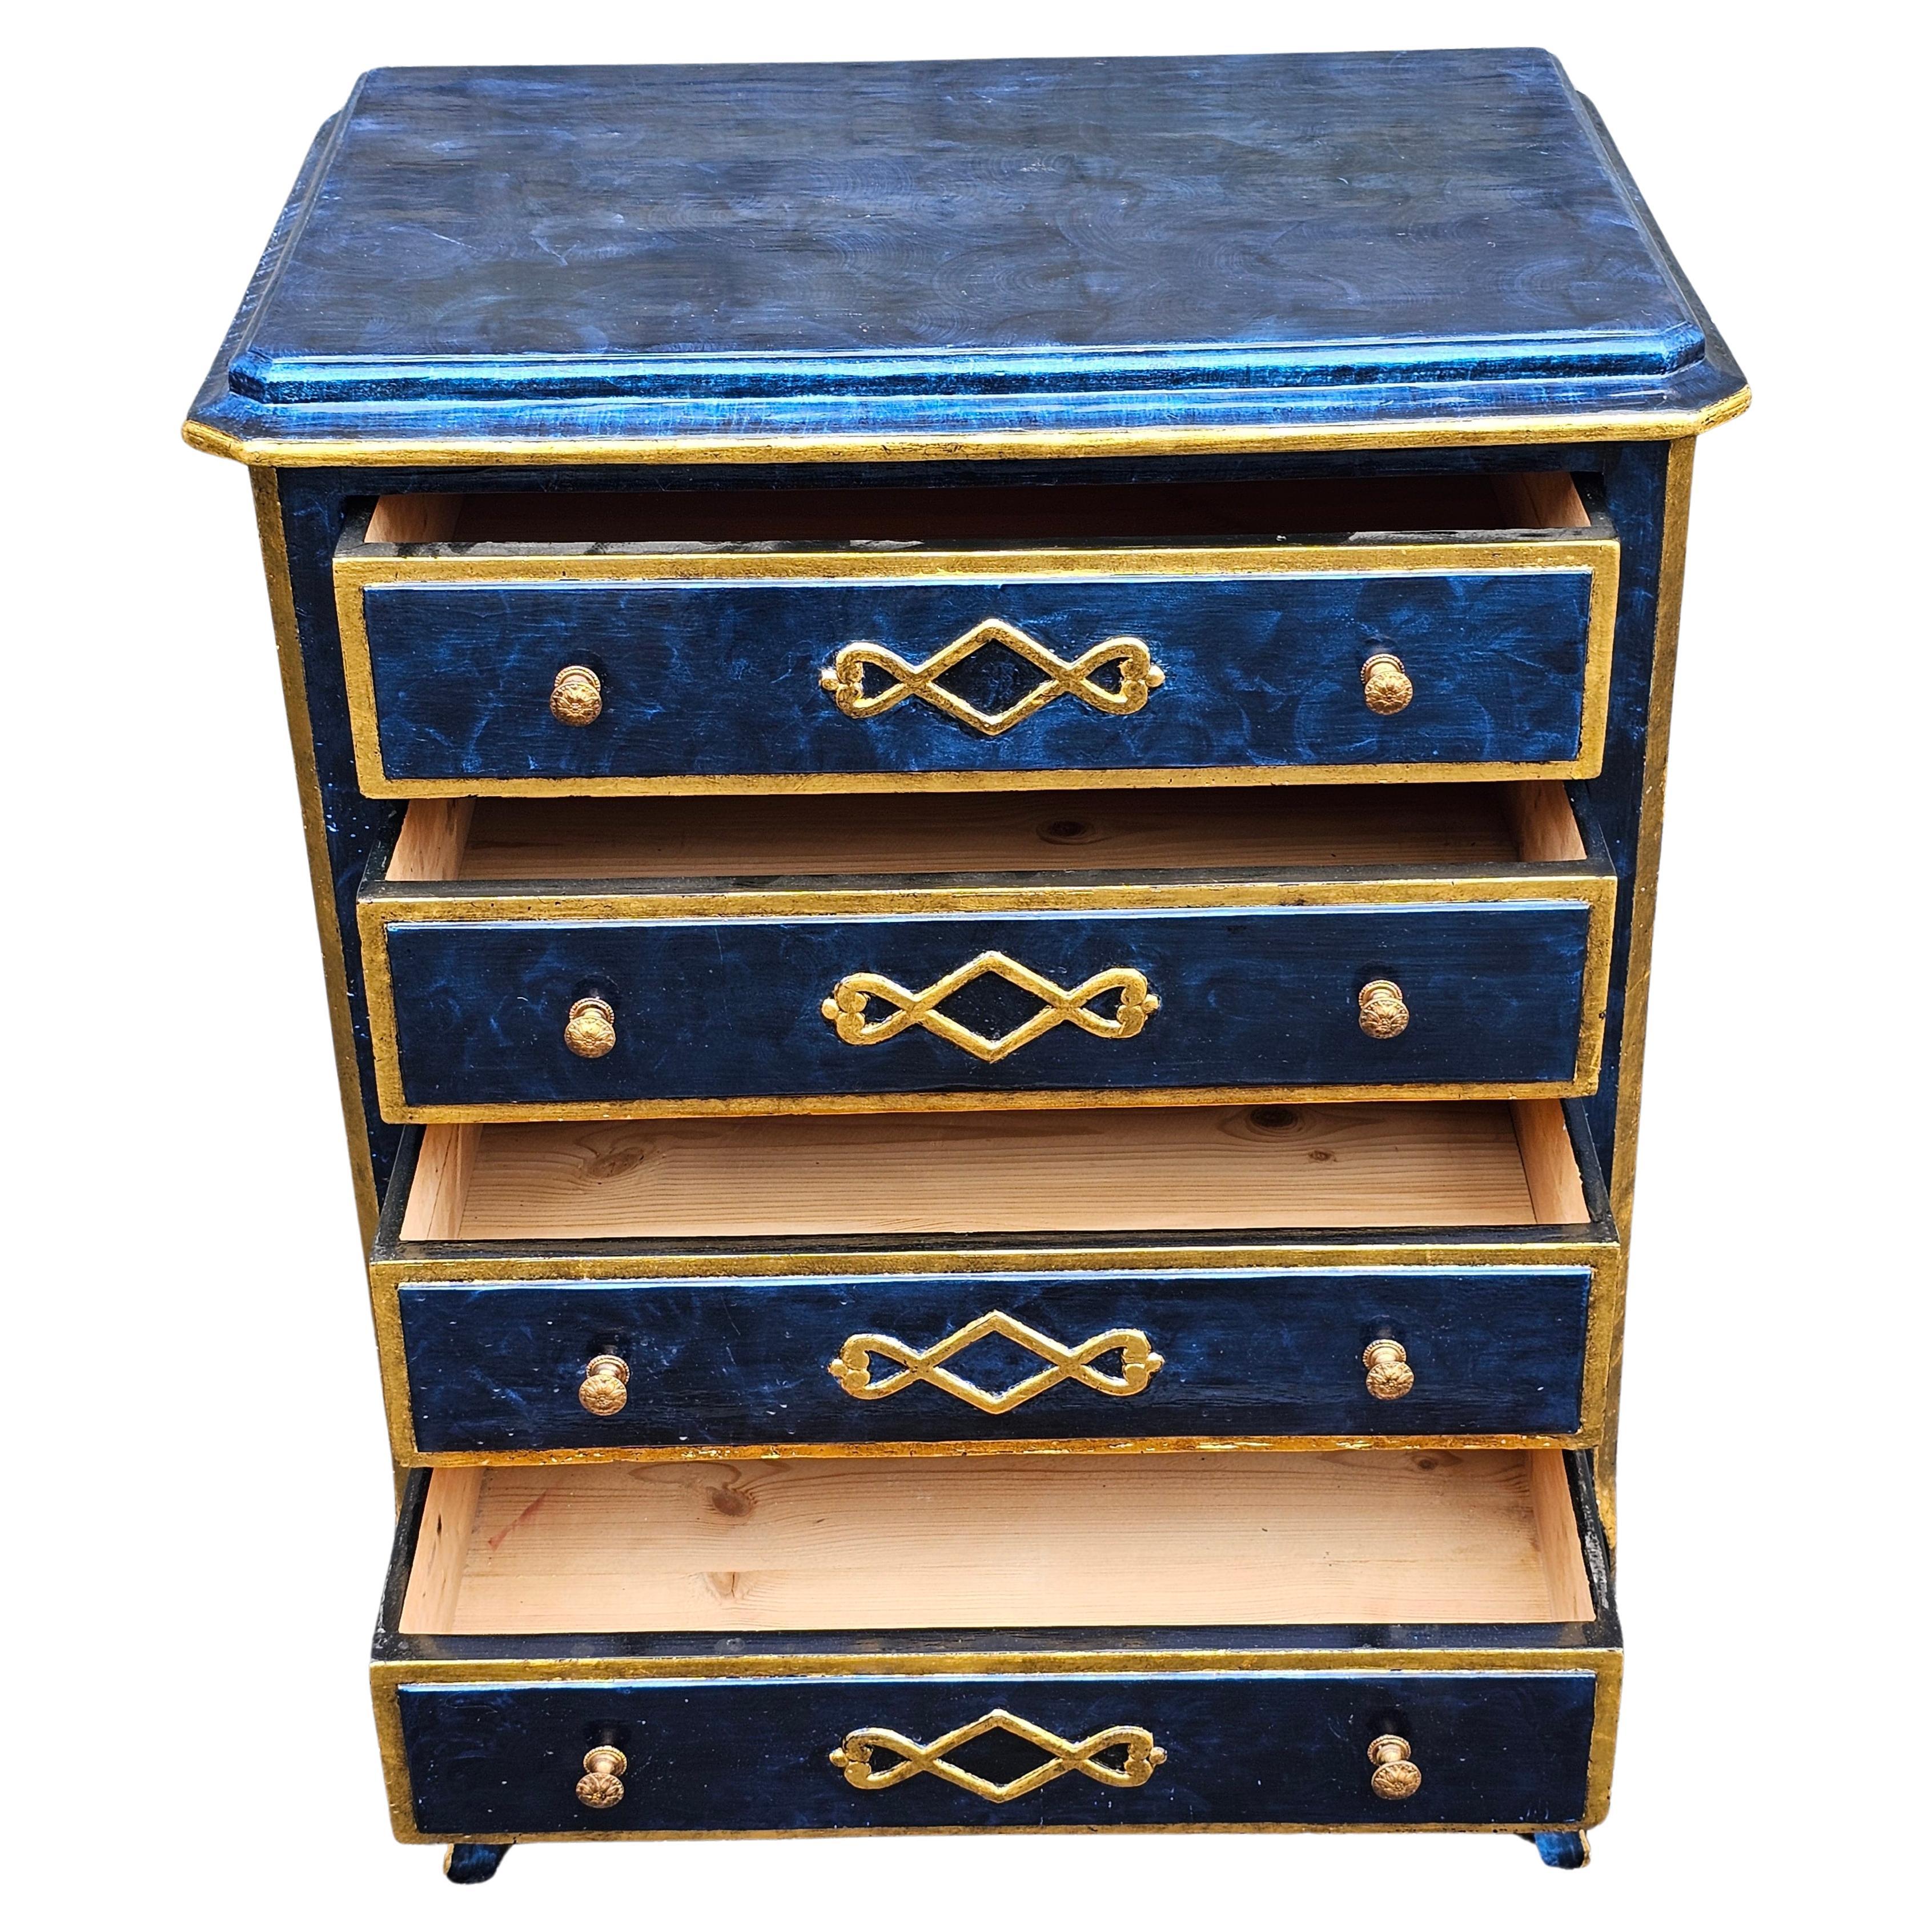 A 20th century all solid pine partial Gilt and hand painted and decorated side chest of drawer by Mastercarft unfinished furniture. Paint artist unknown. Finished throughout. Finished back make it usable in the middle of a room. Washable paint.